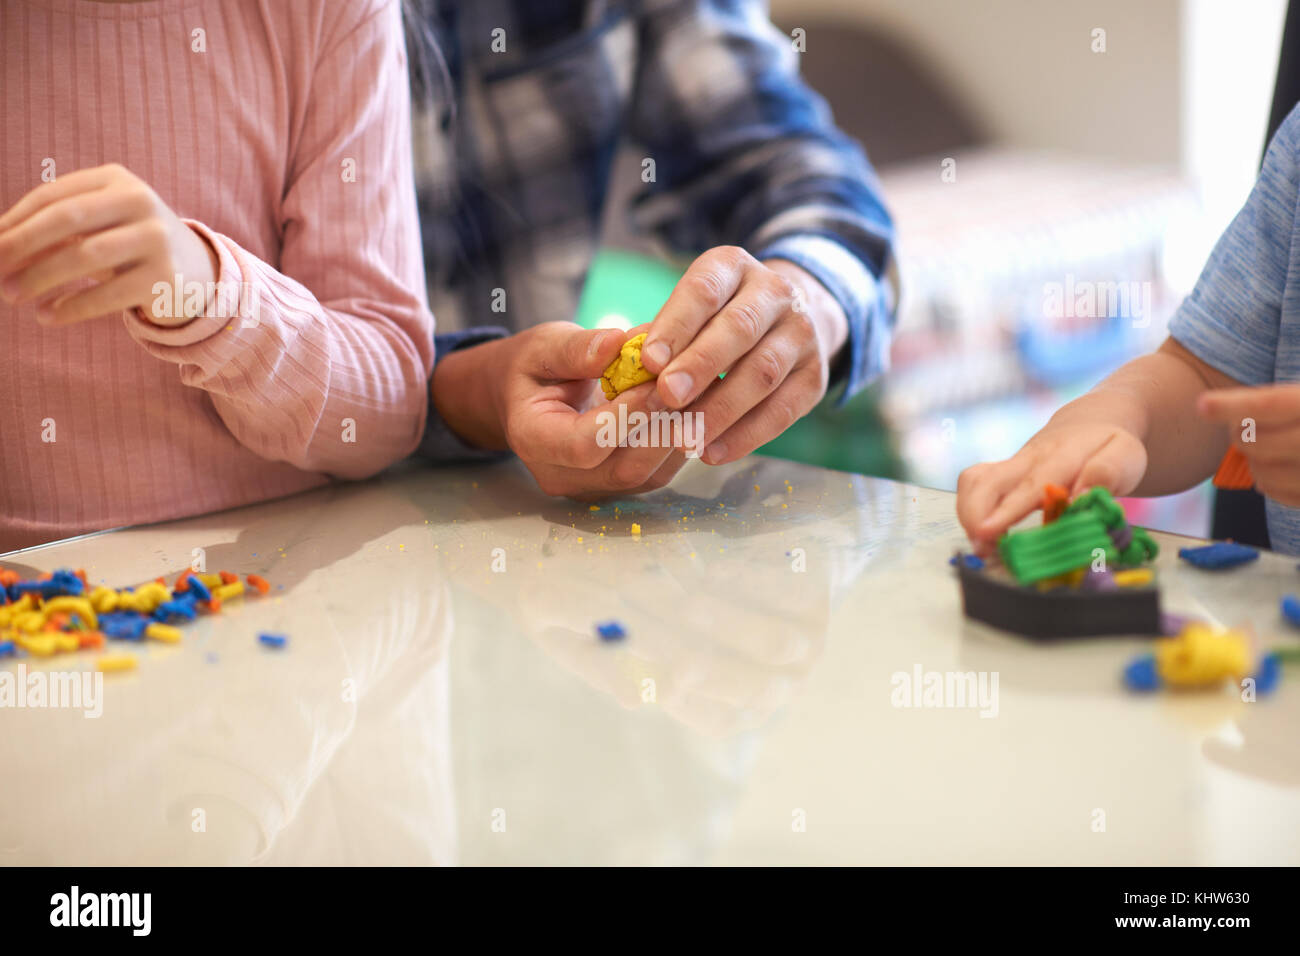 Father, son and daughter, sitting at table, playing with modelling clay, mid section Stock Photo